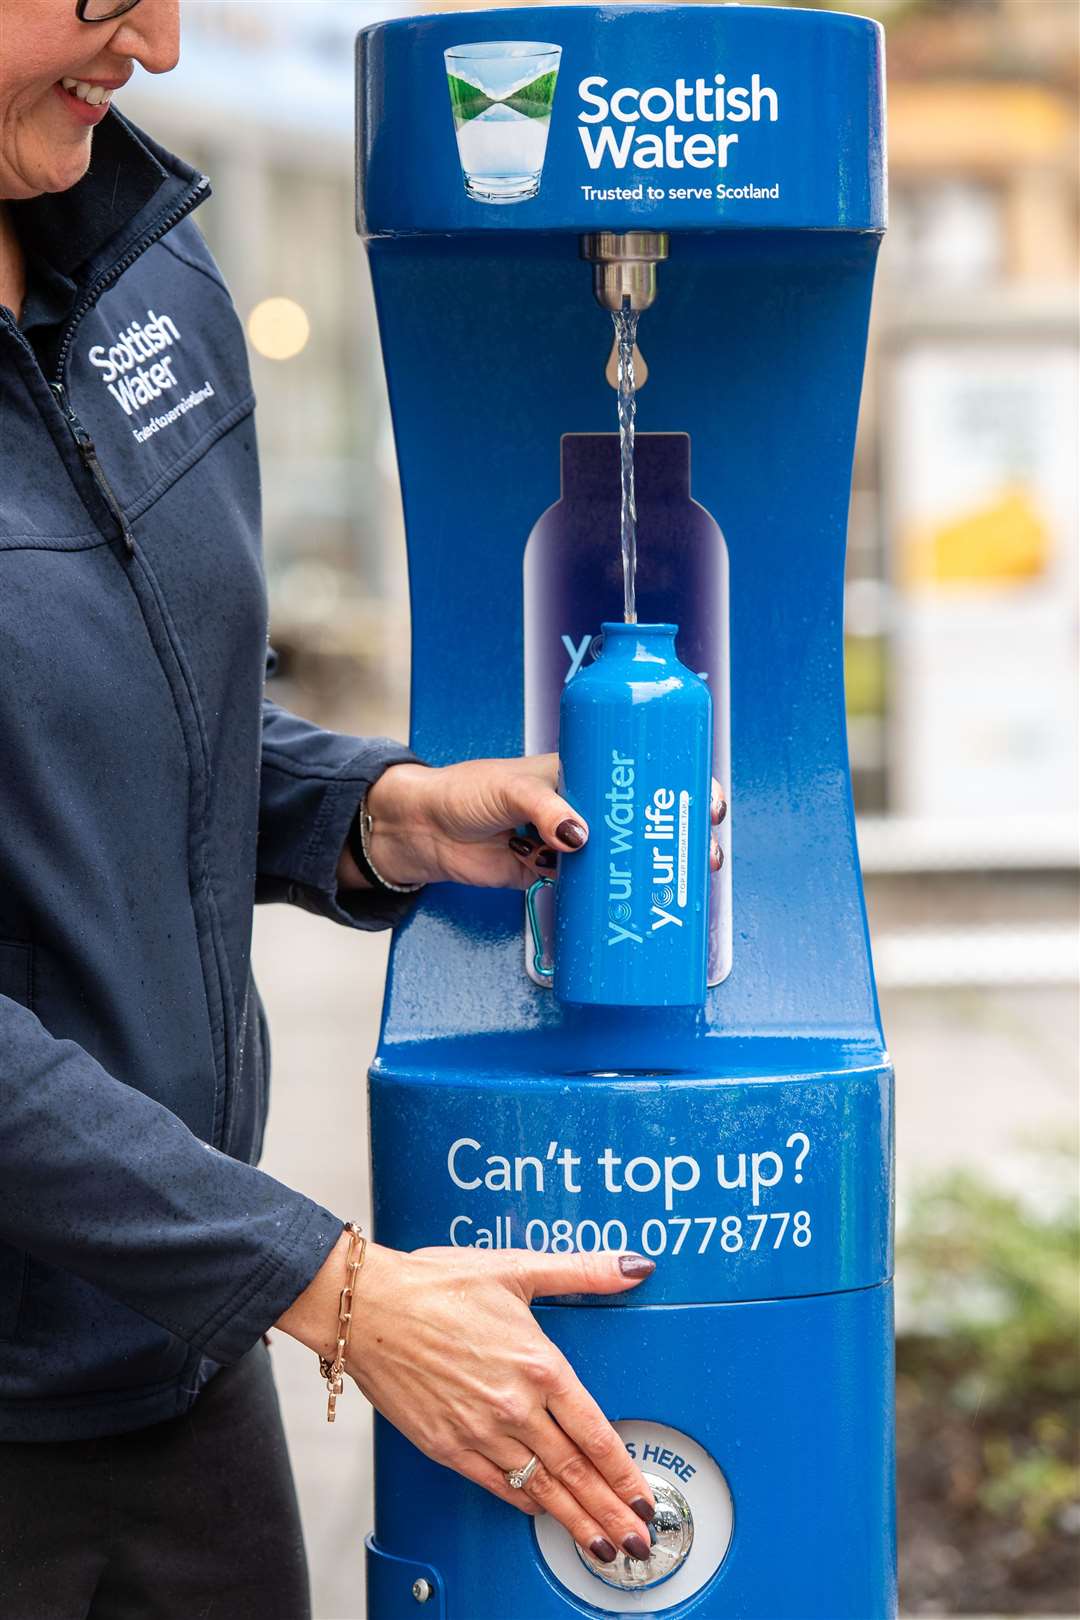 **Pics free to use** Pictured Scottish Water's newest Top up Tap installed in Stirling Scottish Water is celebrating a milestone of 40,000 litres of water being consumed from its Top Up Taps - the equivalent of 120,000 standard 330ml single-use plastic bottles. This month also marks one year since the first top up tap was installed outside the Scottish Parliament as part of an initiative to showcase the benefits of using refillable bottles and Scotland’s tap water.